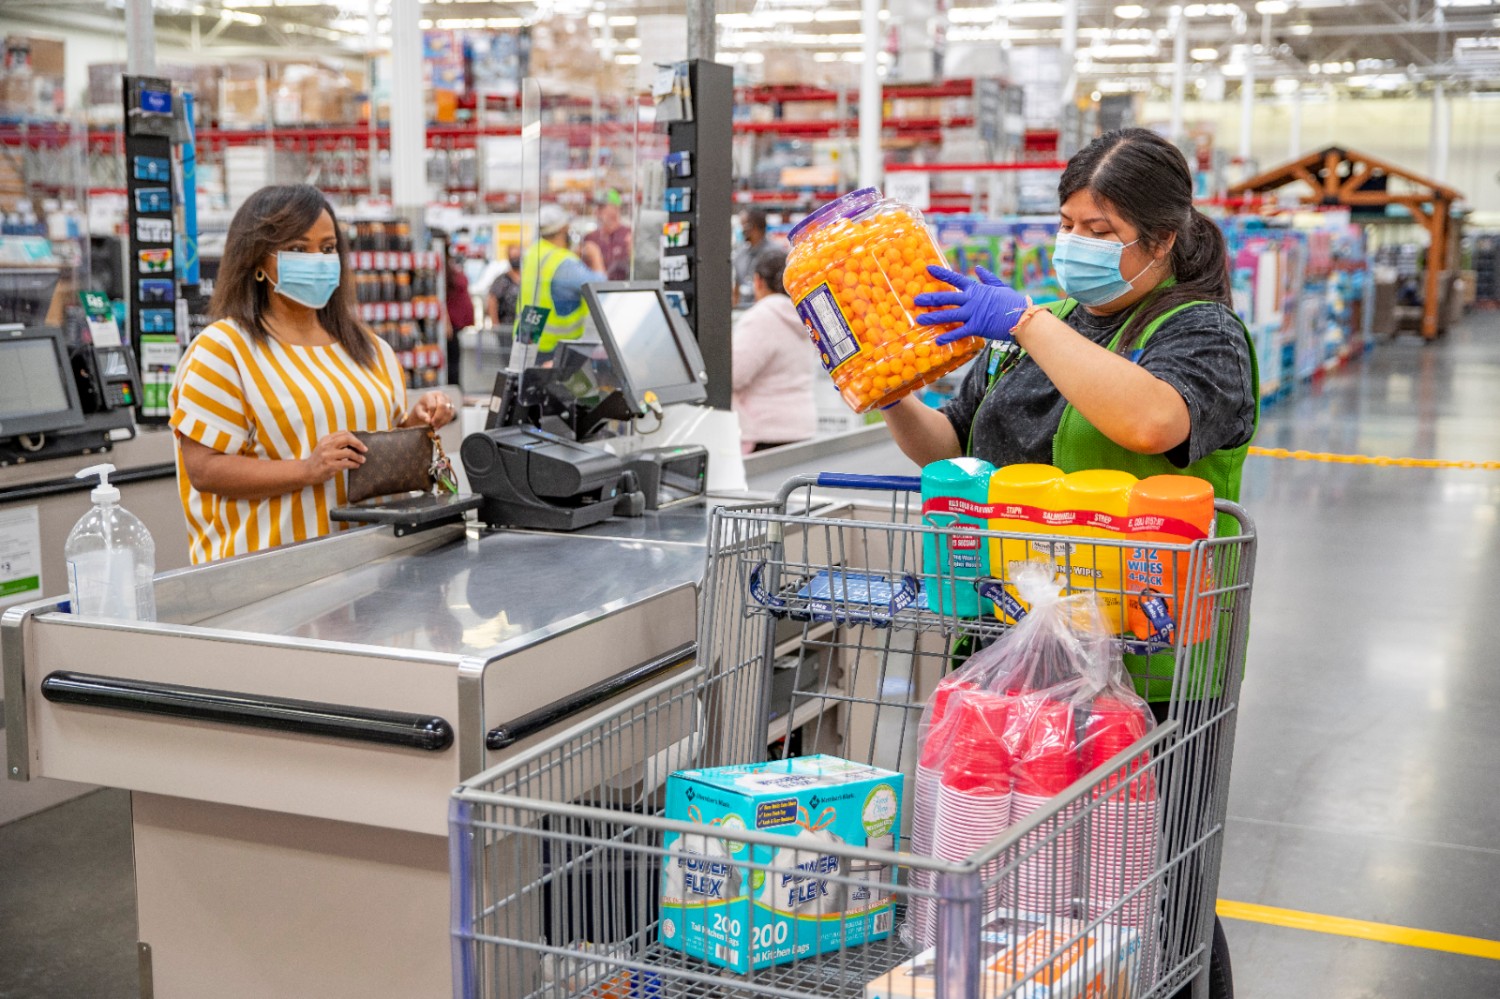 https://corporate.walmart.com/content/corporate/en_us/about/samsclub/business/a-simple-step-to-help-keep-you-safe-walmart-and-sams-club-require-shoppers-to-wear-face-coverings/jcr:content/par/image_7.img.jpg/1692735984500.jpg